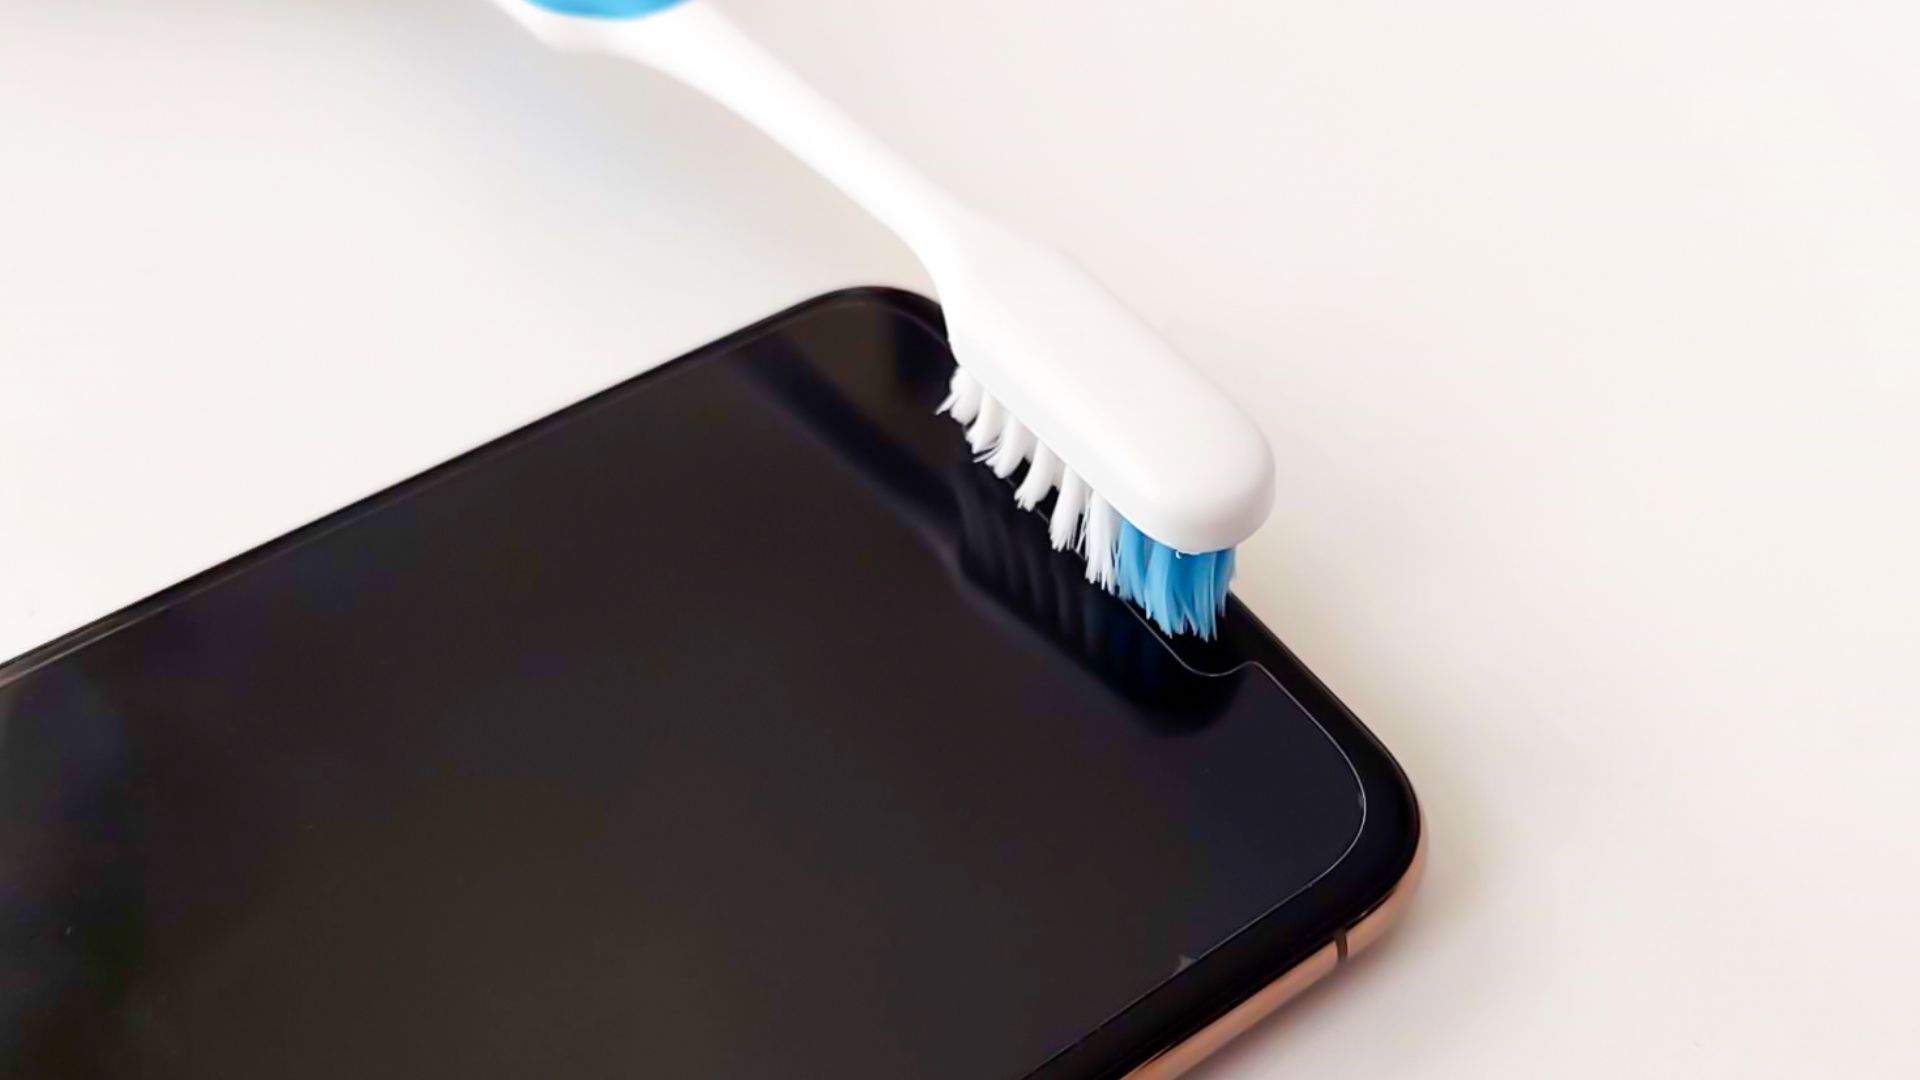 How to clean microphone on iPhone using a toothbrush